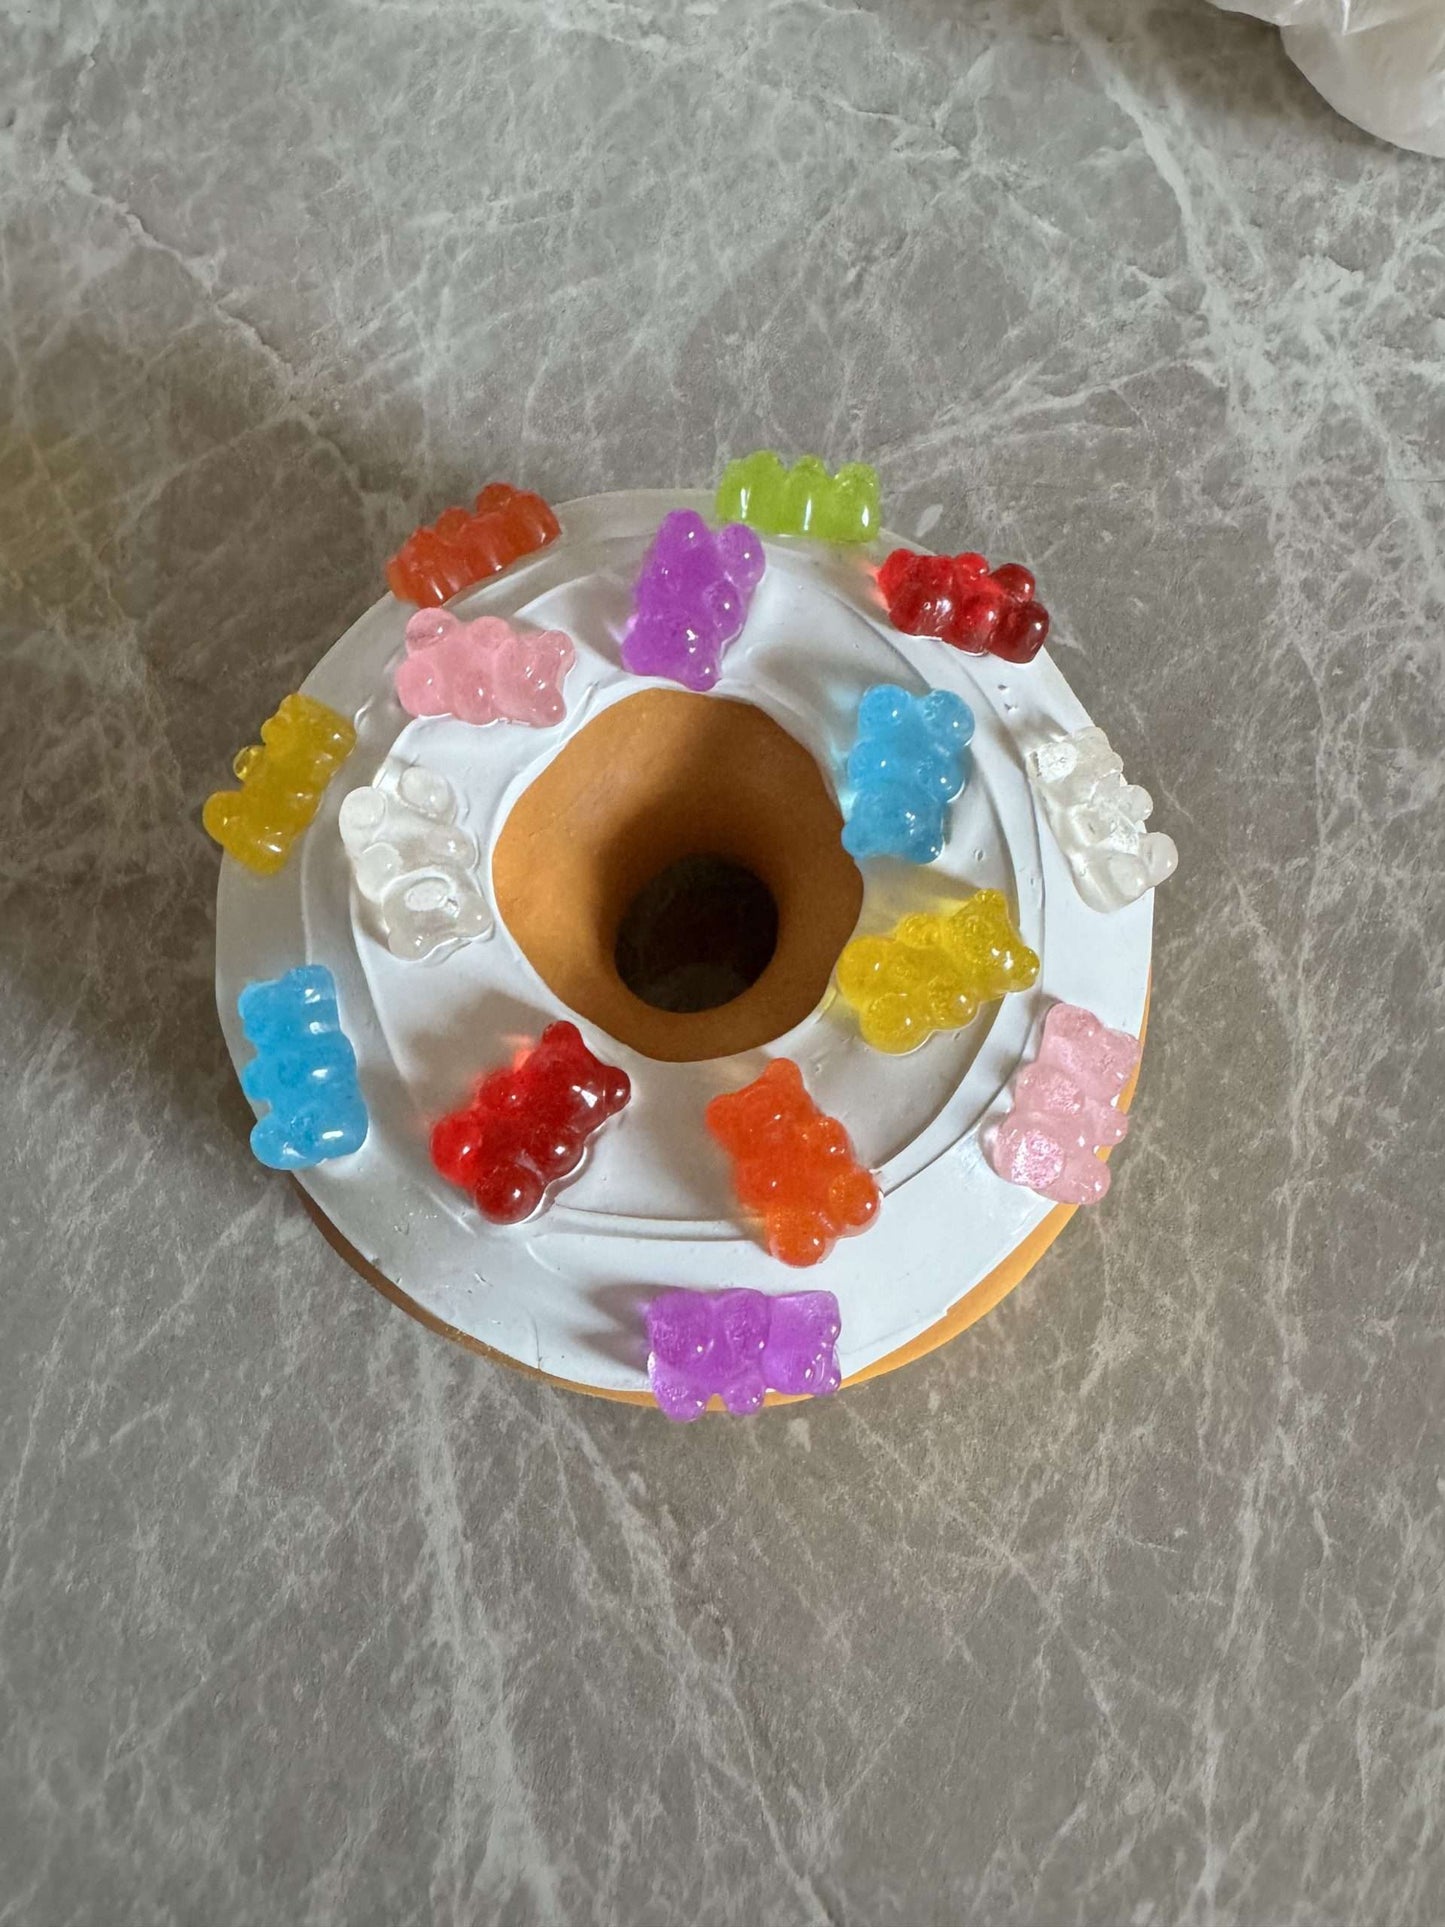 Donut with white icing and colorful gummy bears